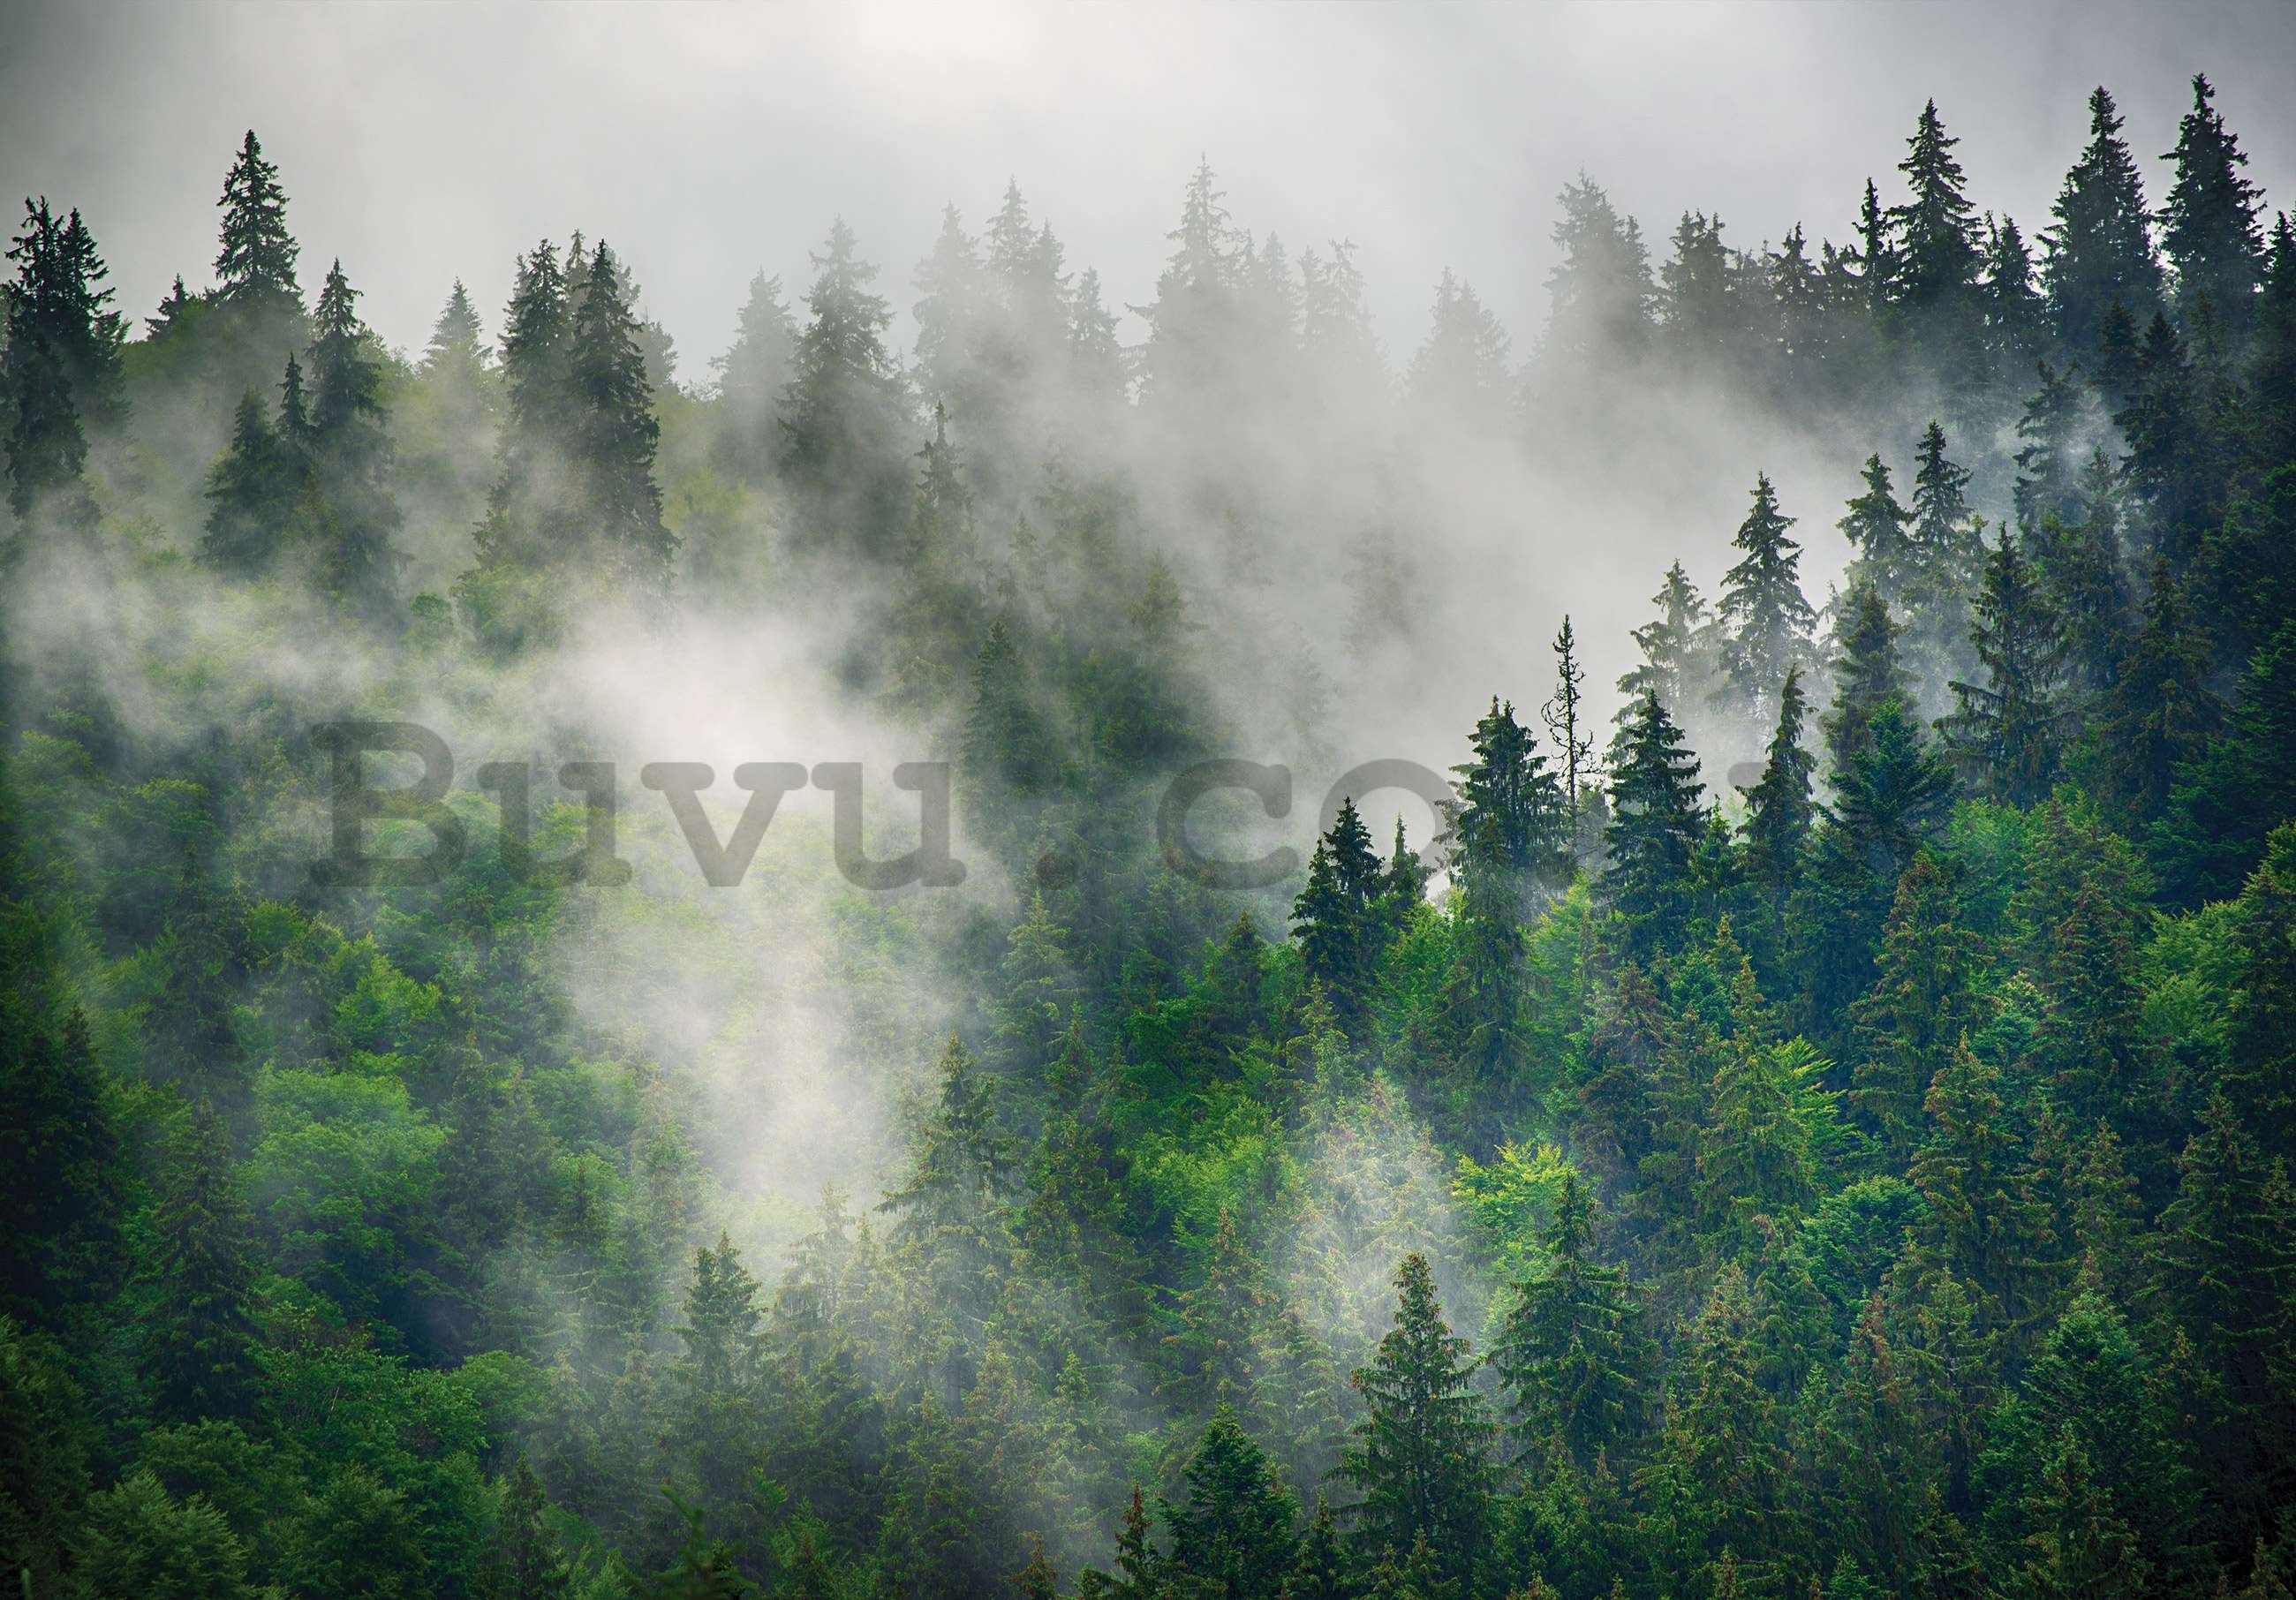 Wall mural vlies: Fog over the forest (5) - 152,5x104 cm